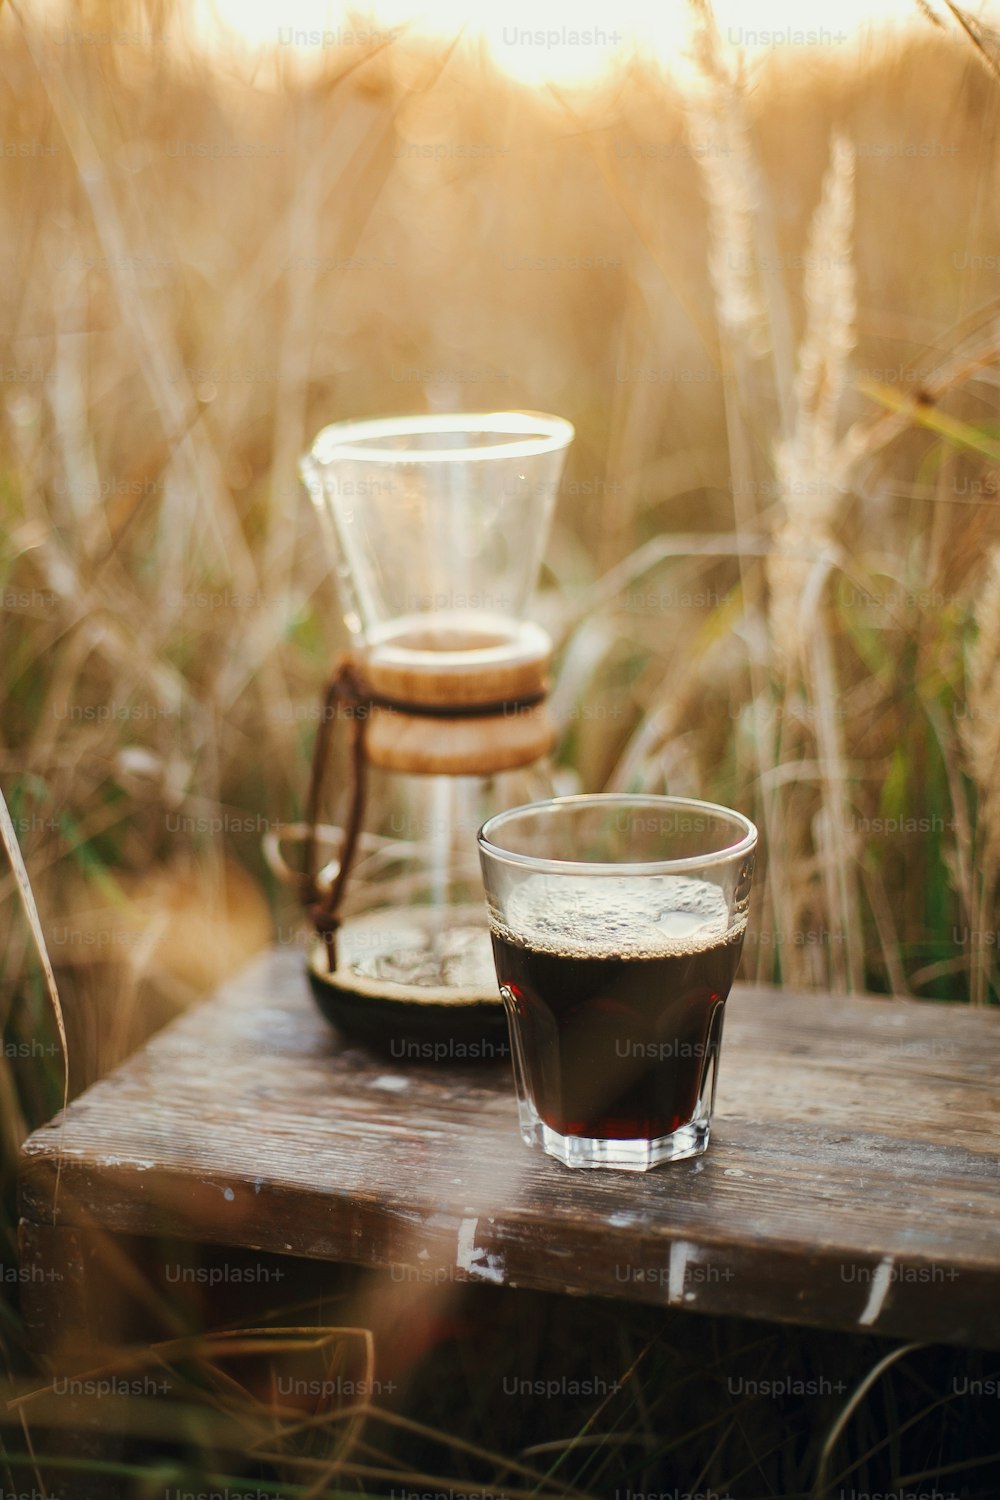 Alternative coffee brewing outdoors in travel. Hot coffee in glass cup and glass flask on background in sunny warm light in rural herbs. Atmospheric rustic tranquil moment. Vertical image